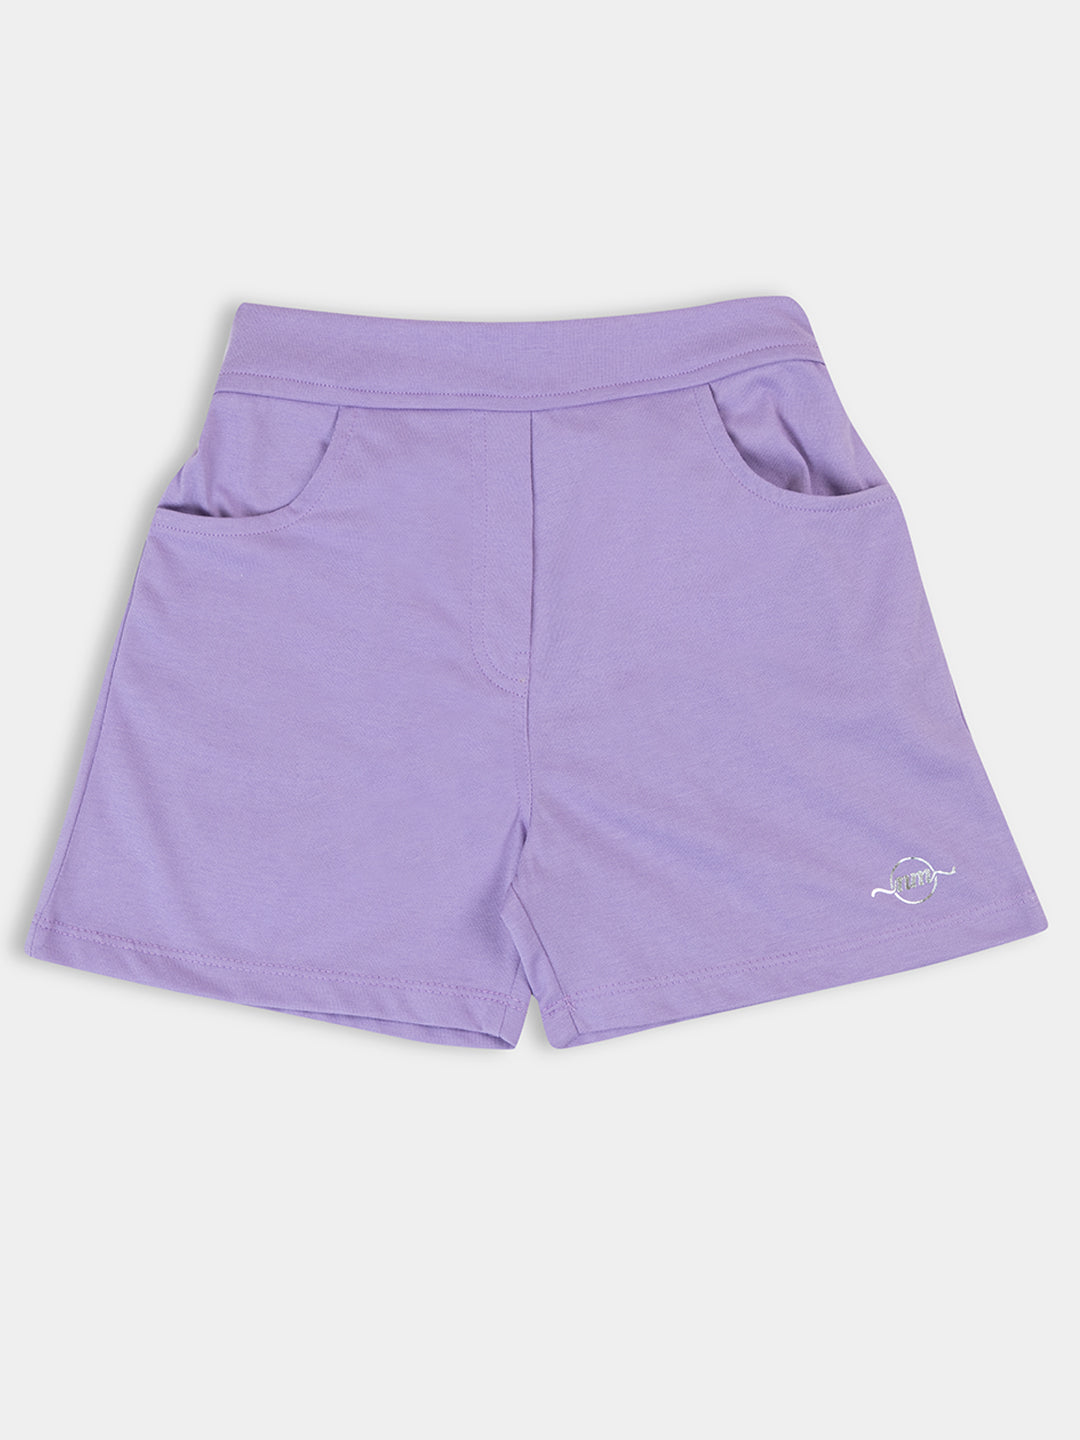 Sweet Summer Set: 3-Piece Combo of Girls' Solid Shorts